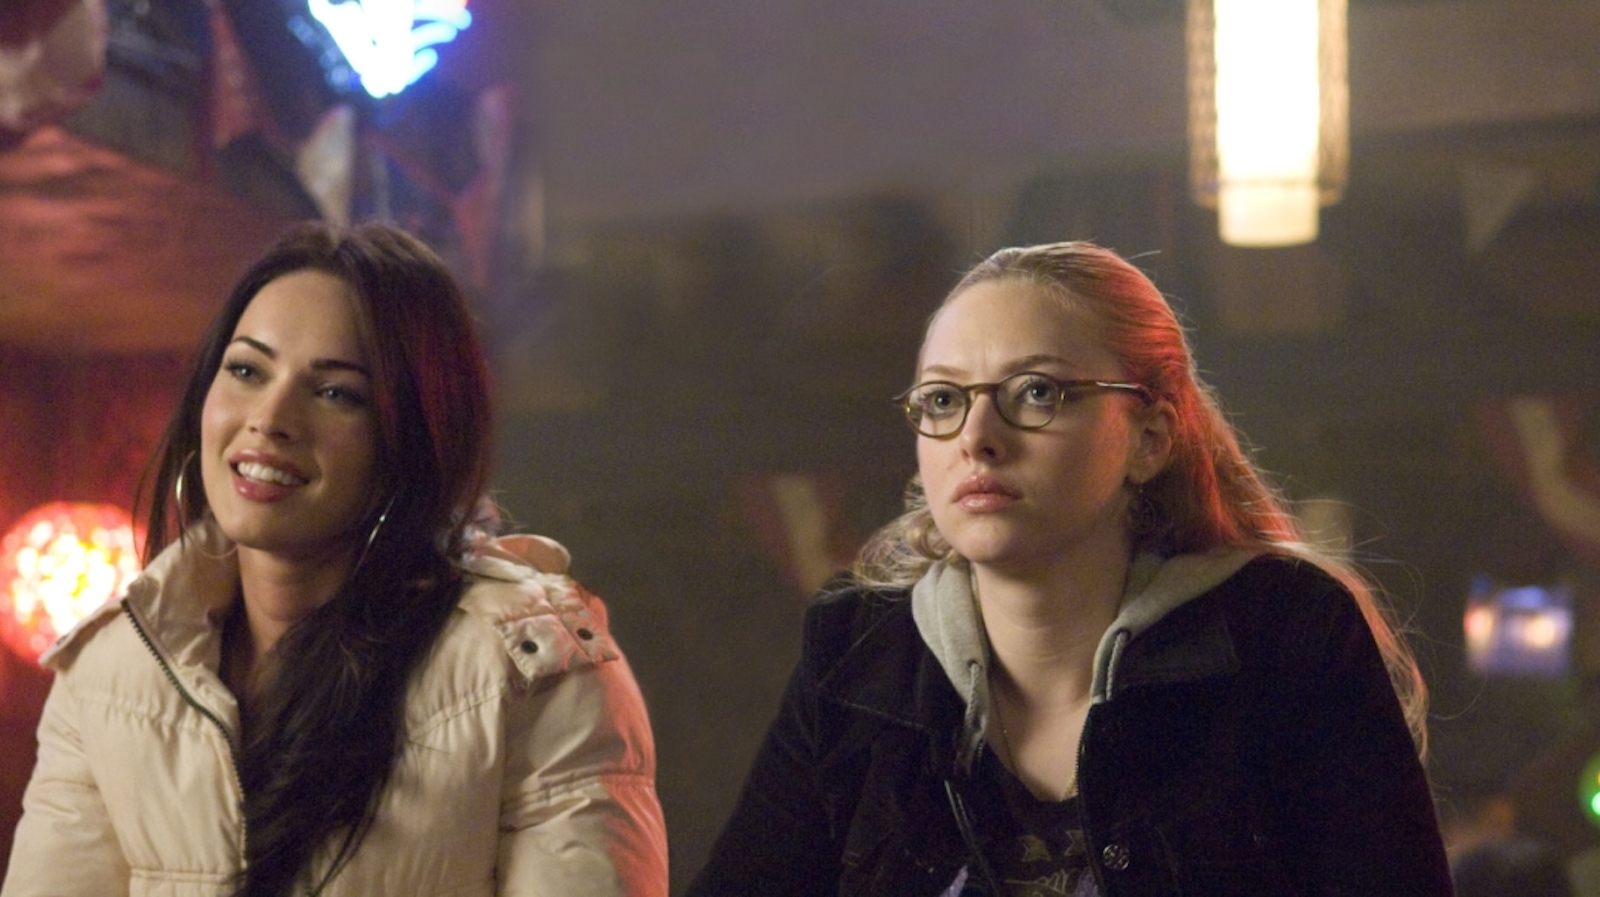 Two young women sit at a bar, one blonde, one brunette, the blonde isn't smiling, the brunette is, as they look off camera